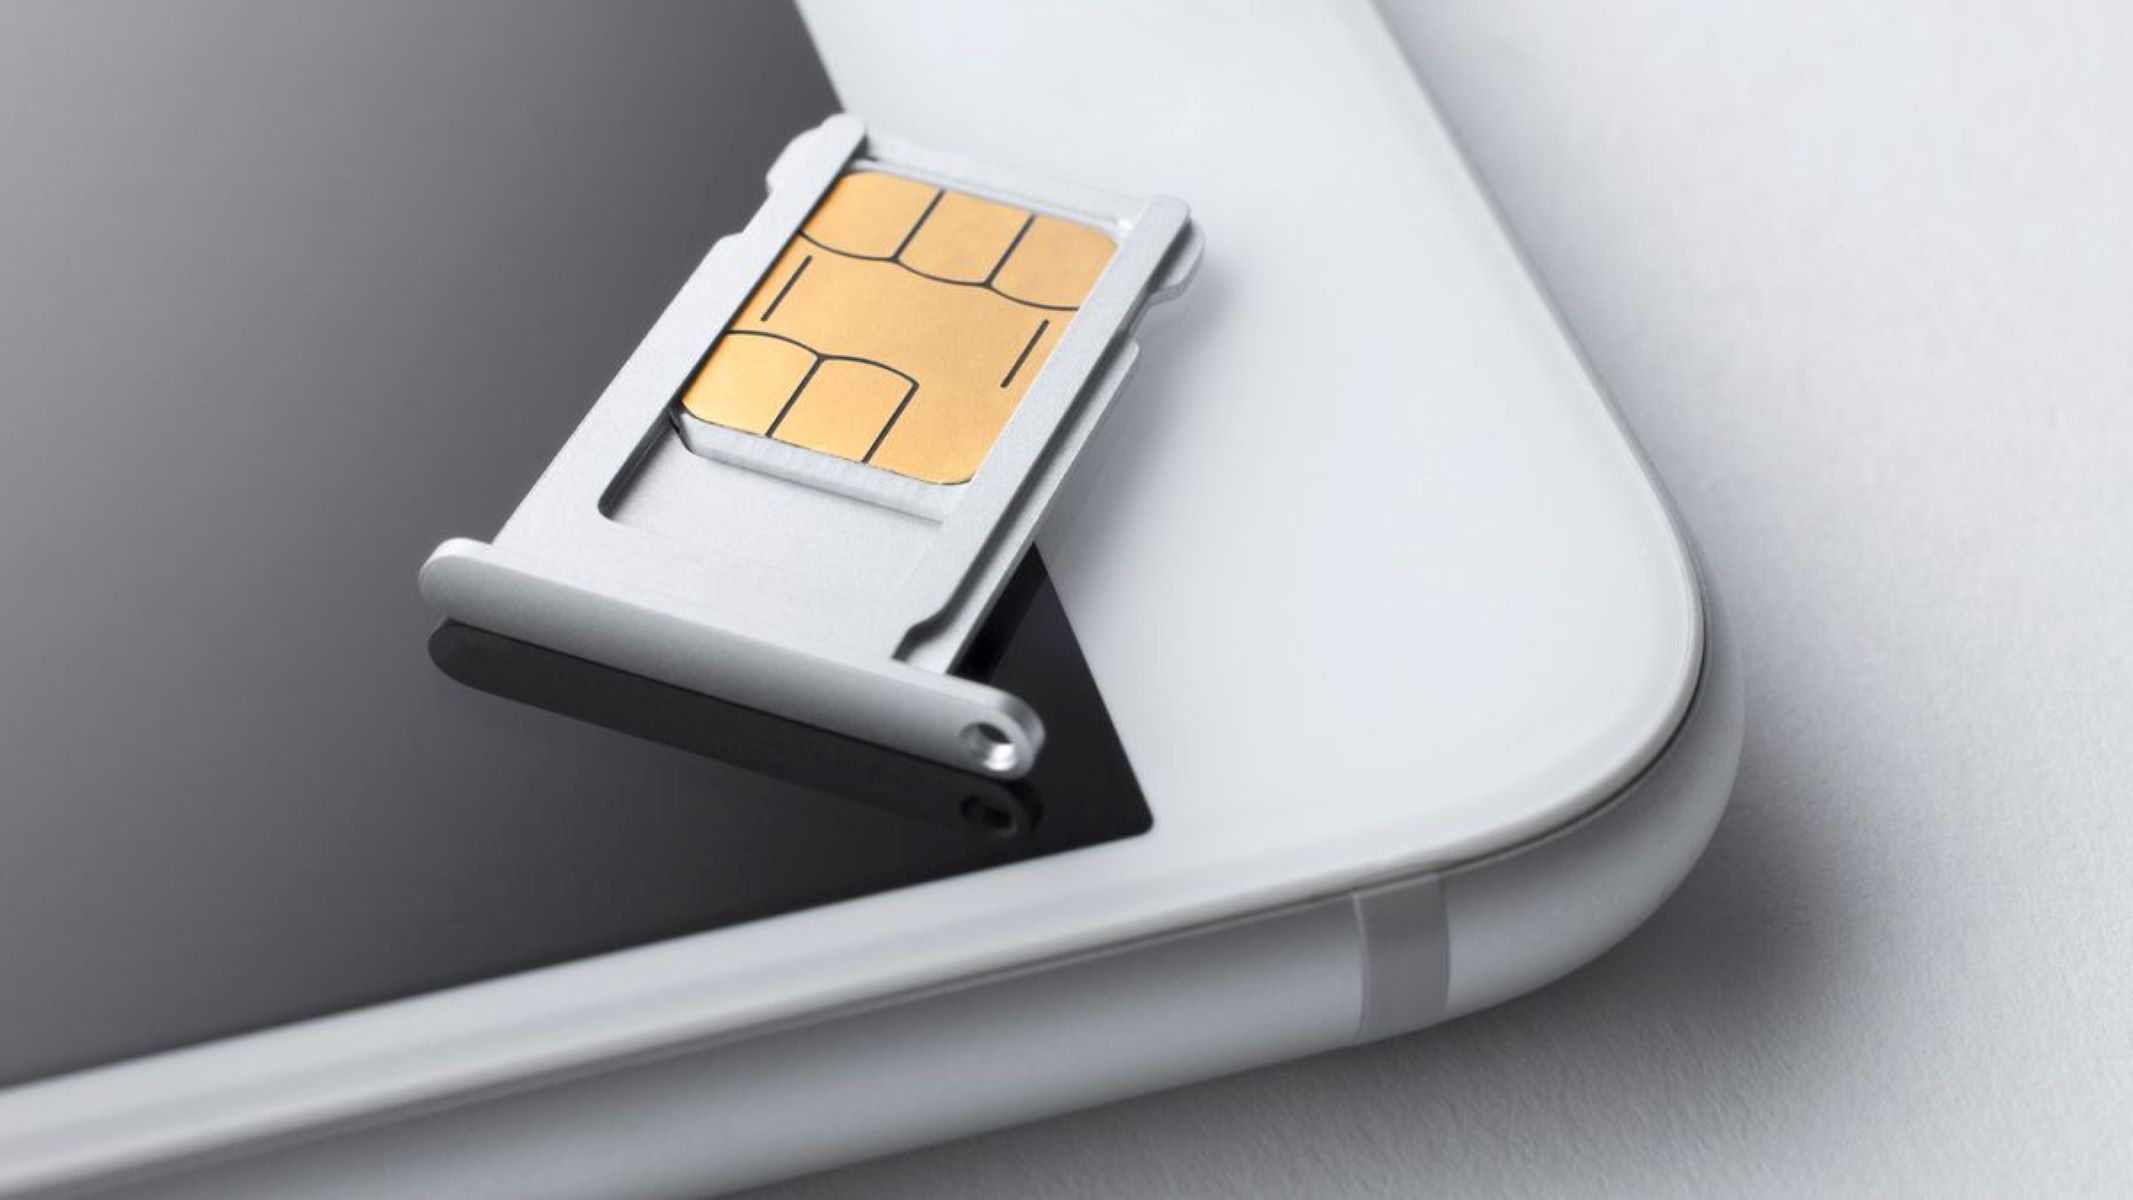 Transferring Data To SIM Card On IPhone: Easy Steps